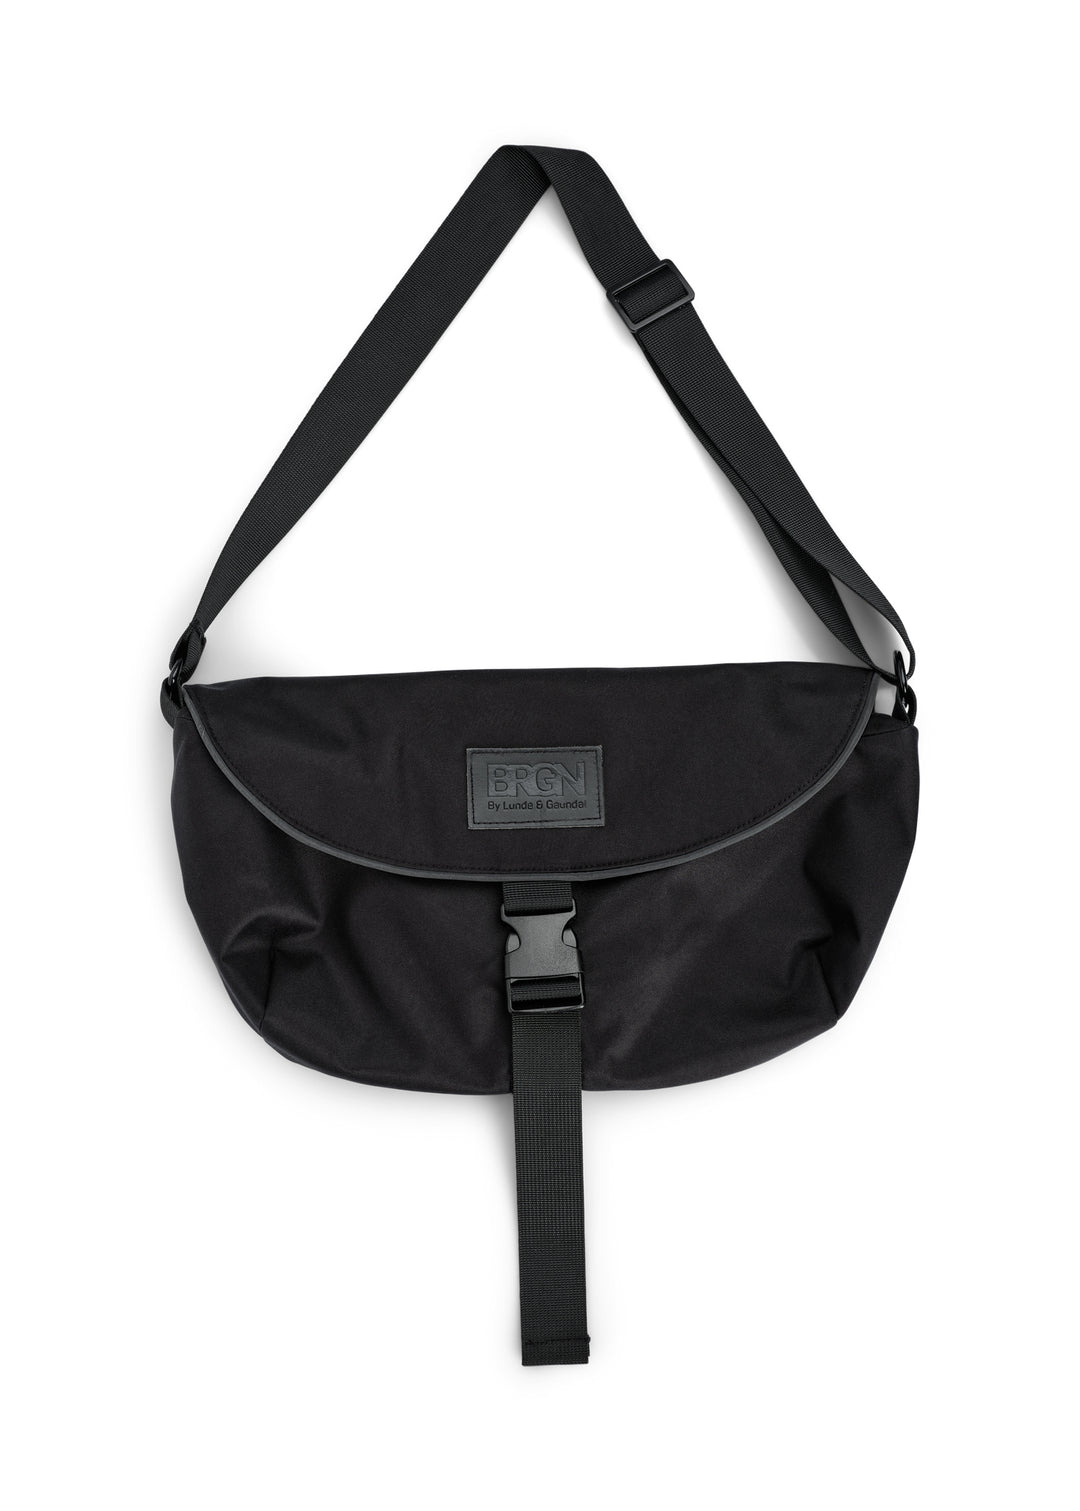 BRGN by Lunde & Gaundal Banana Bag Accessories 095 New Black